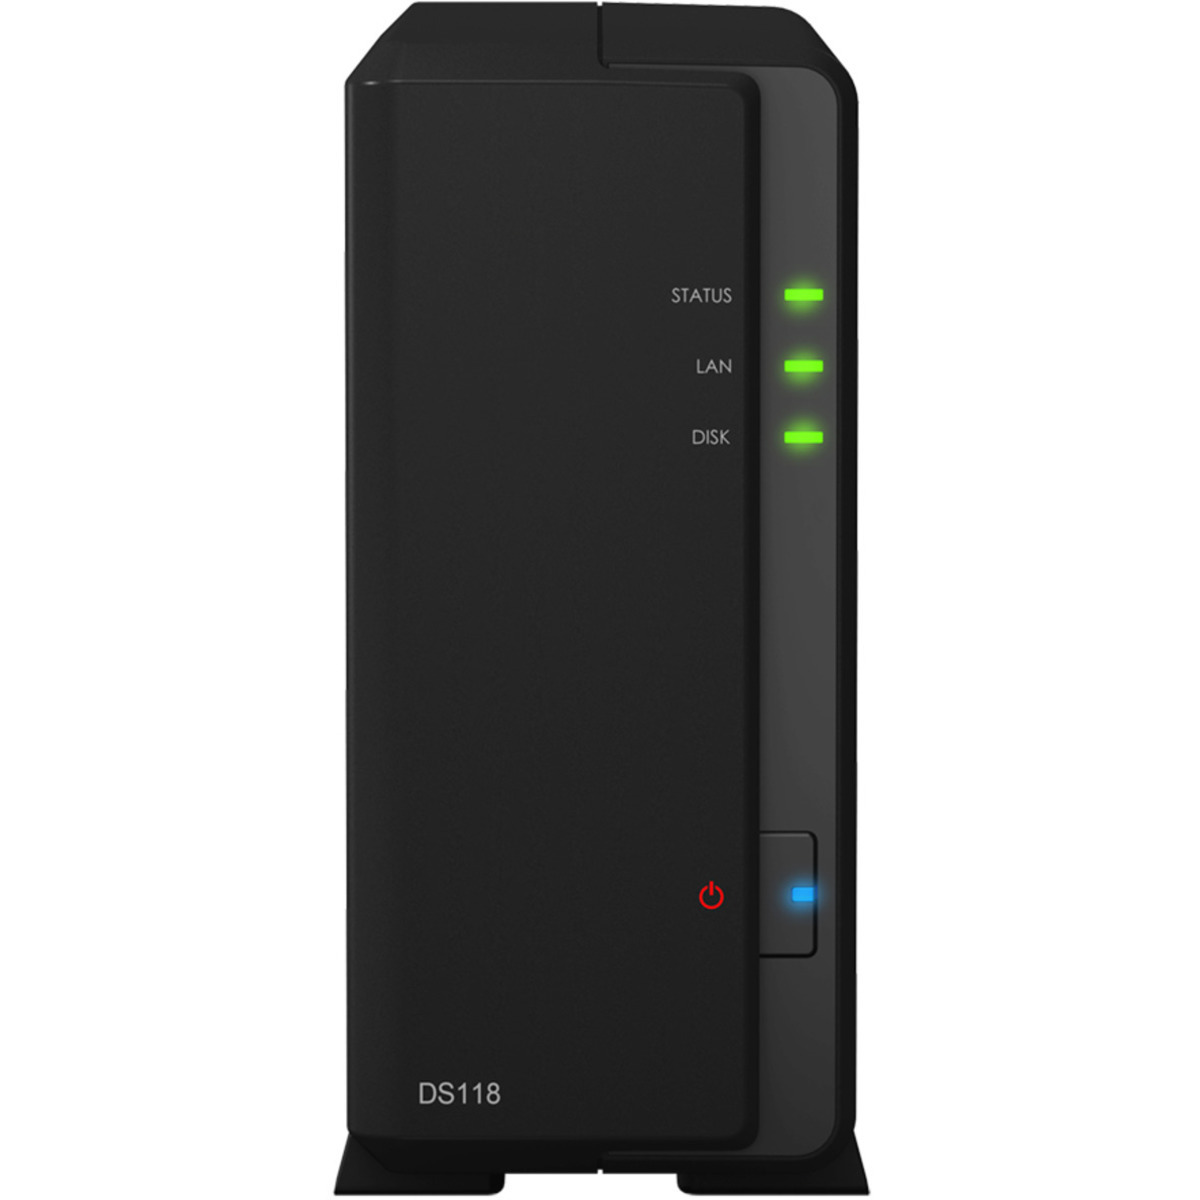 buy $535 Synology DiskStation DS118 12tb Desktop NAS - Network Attached Storage Device 1x12000gb Seagate IronWolf Pro ST12000NT001 3.5 7200rpm SATA 6Gb/s HDD NAS Class Drives Installed - Burn-In Tested - nas headquarters buy network attached storage server device das new raid-5 free shipping simply usa DiskStation DS118